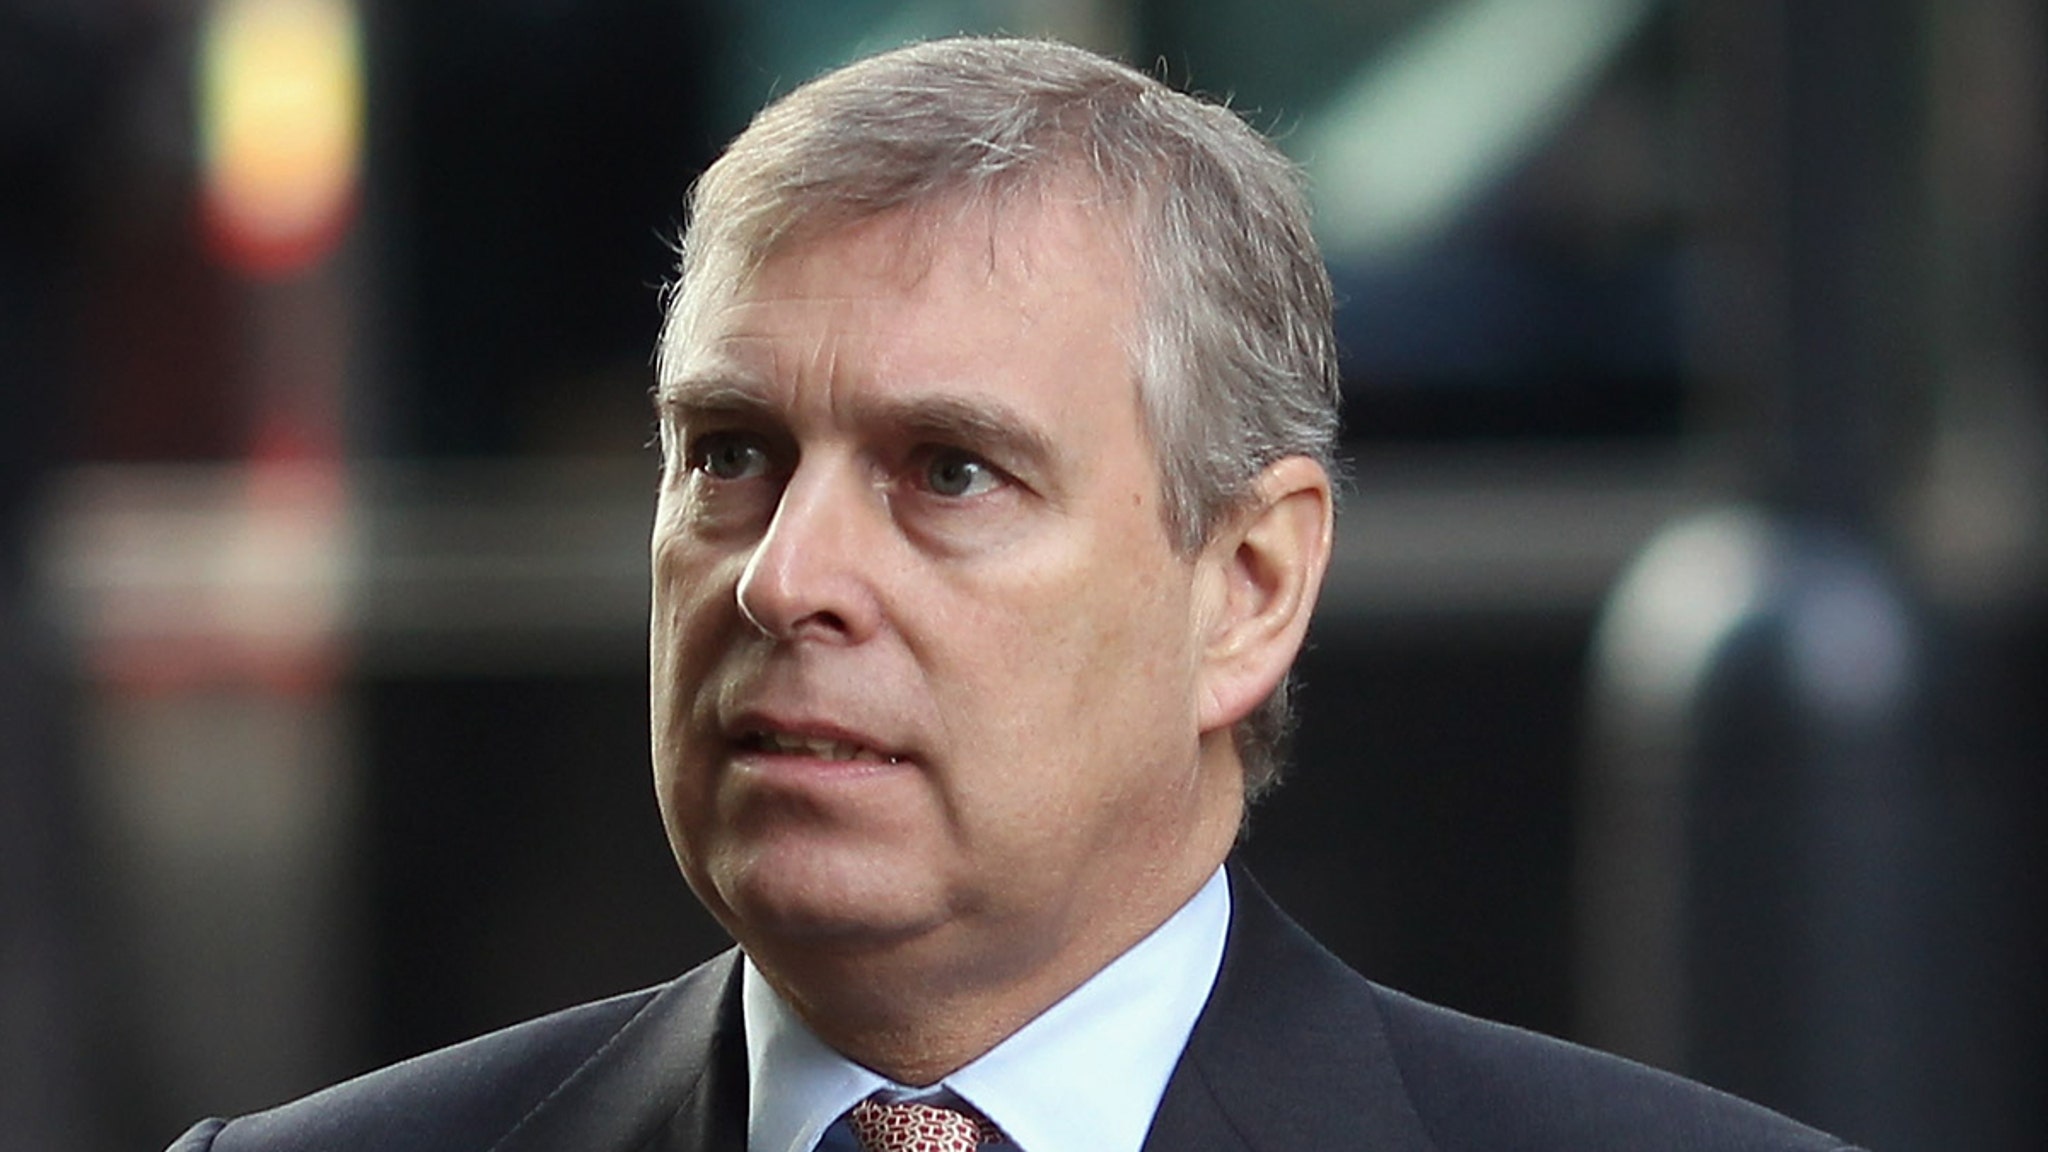 Prince Andrew Sued for Sexual Assault